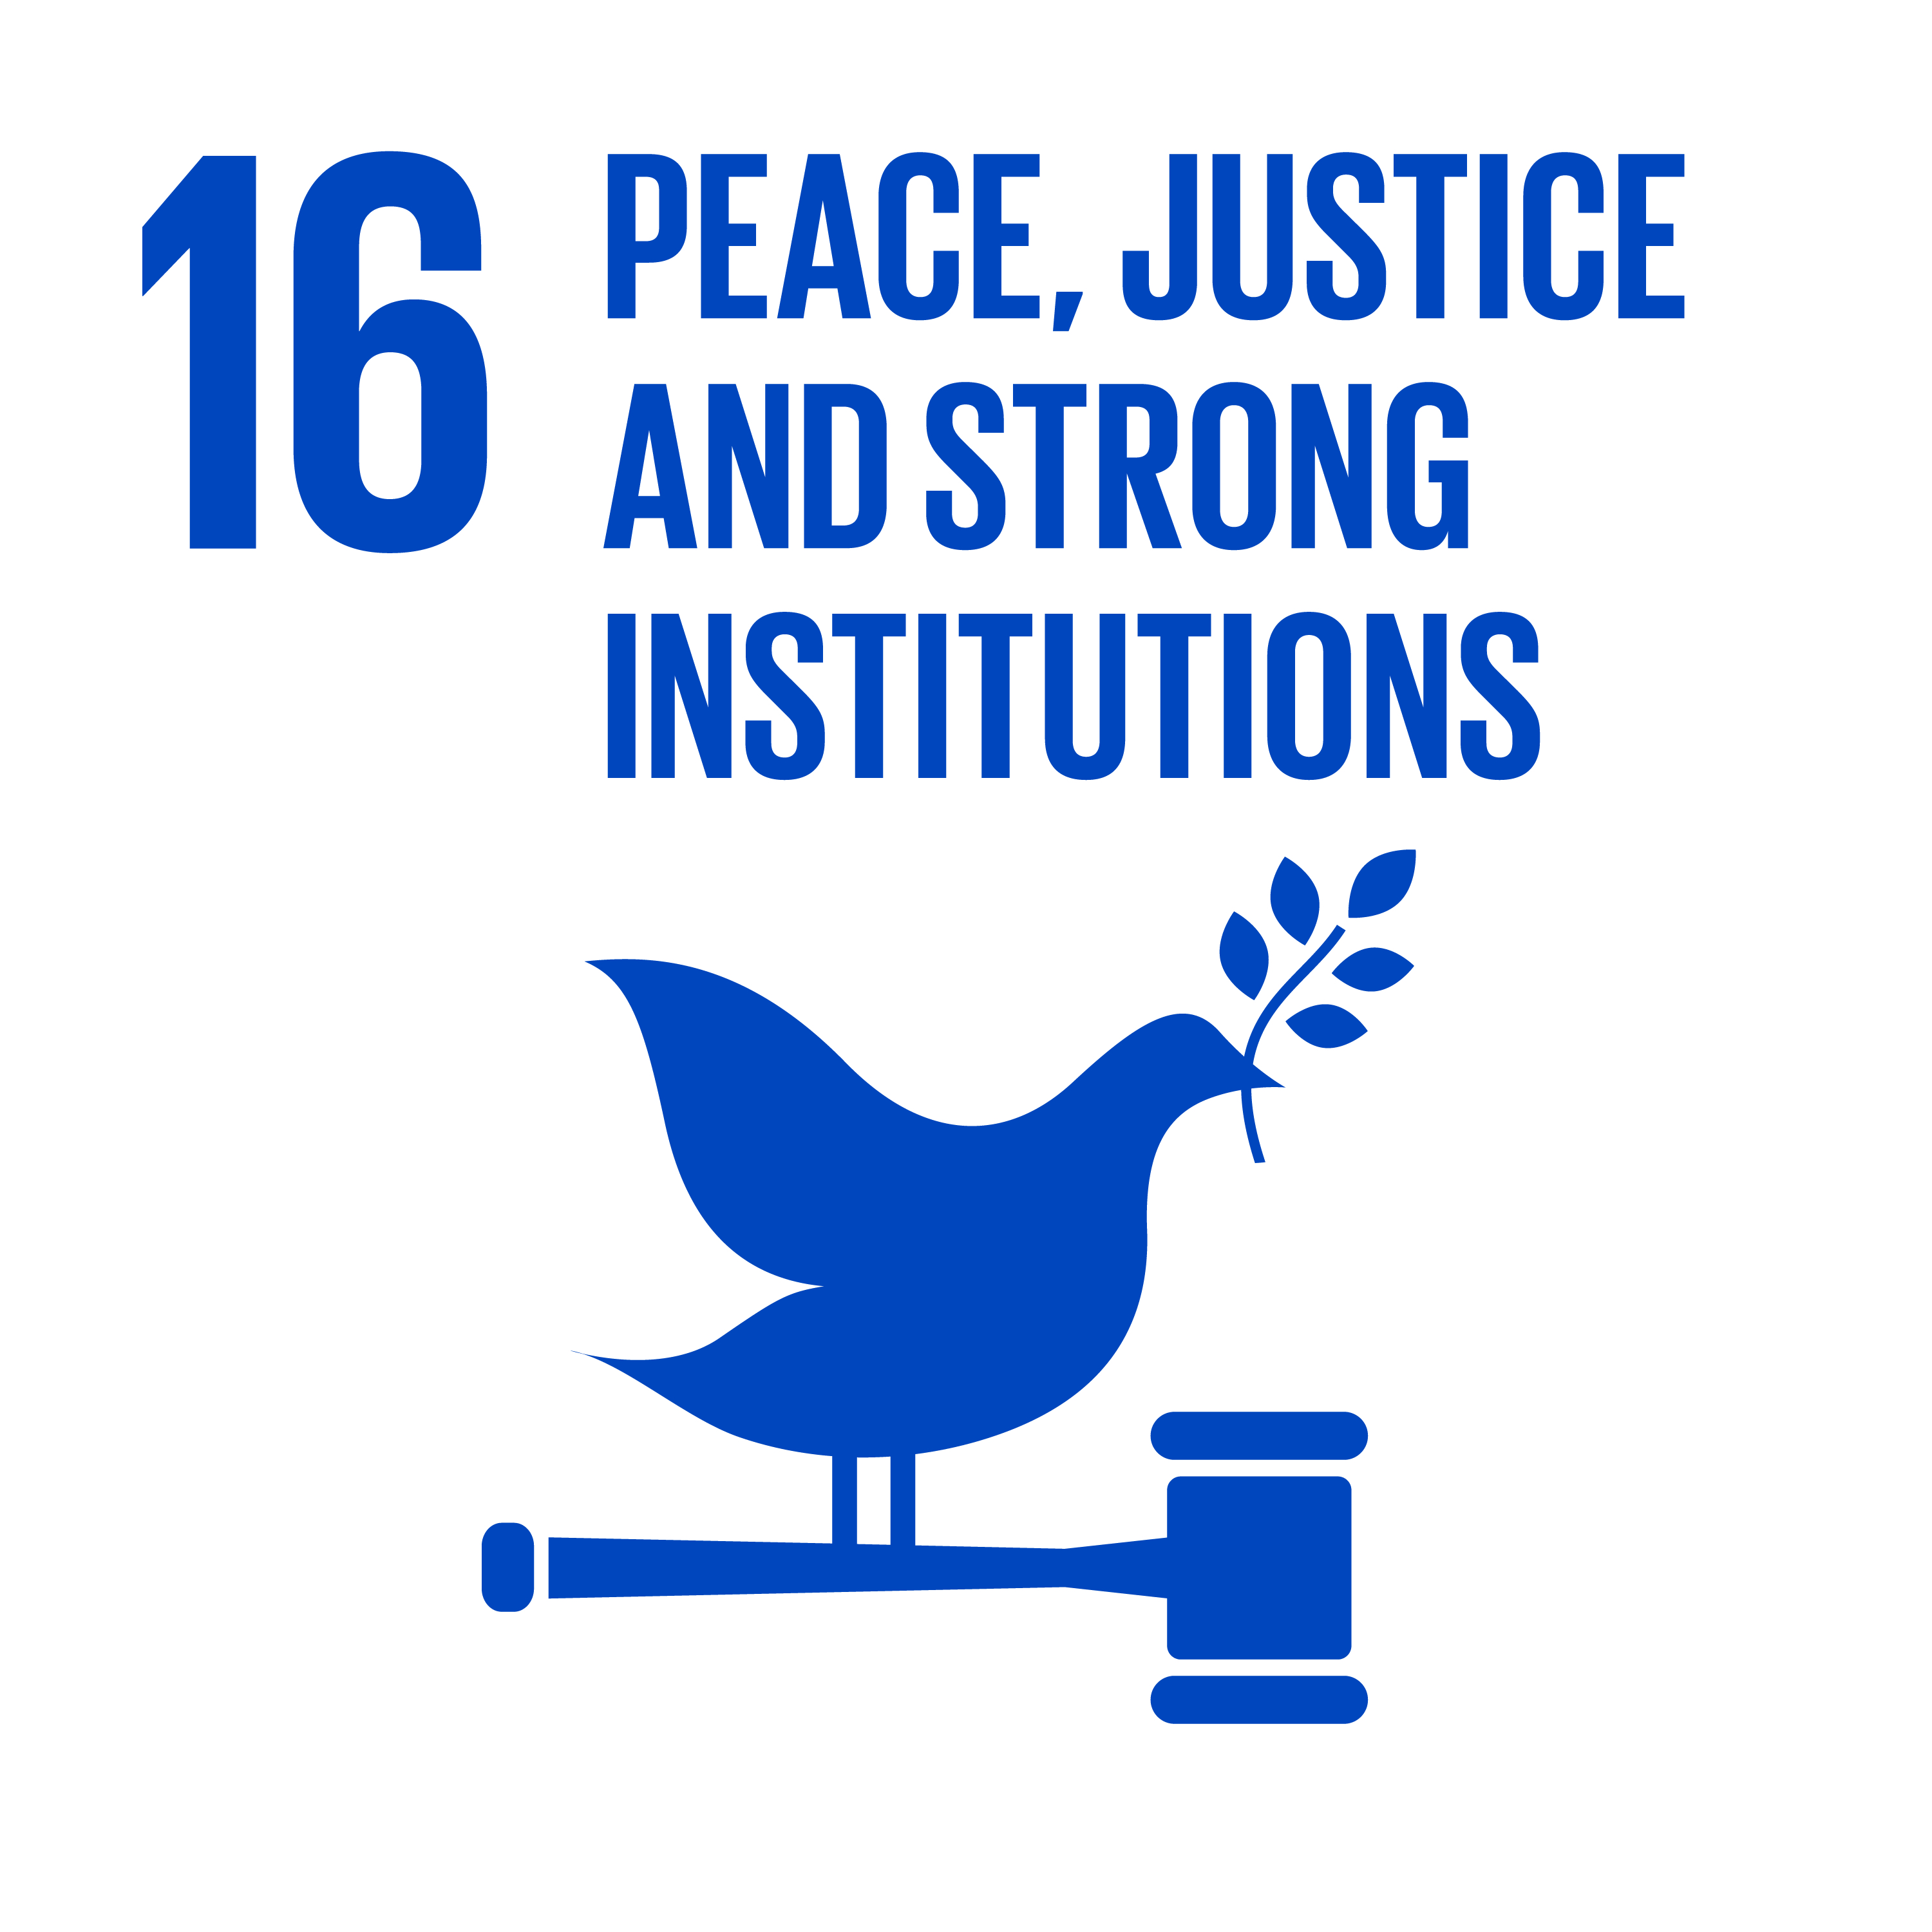 Sustainable development goals: Peace, justice and strong institutions